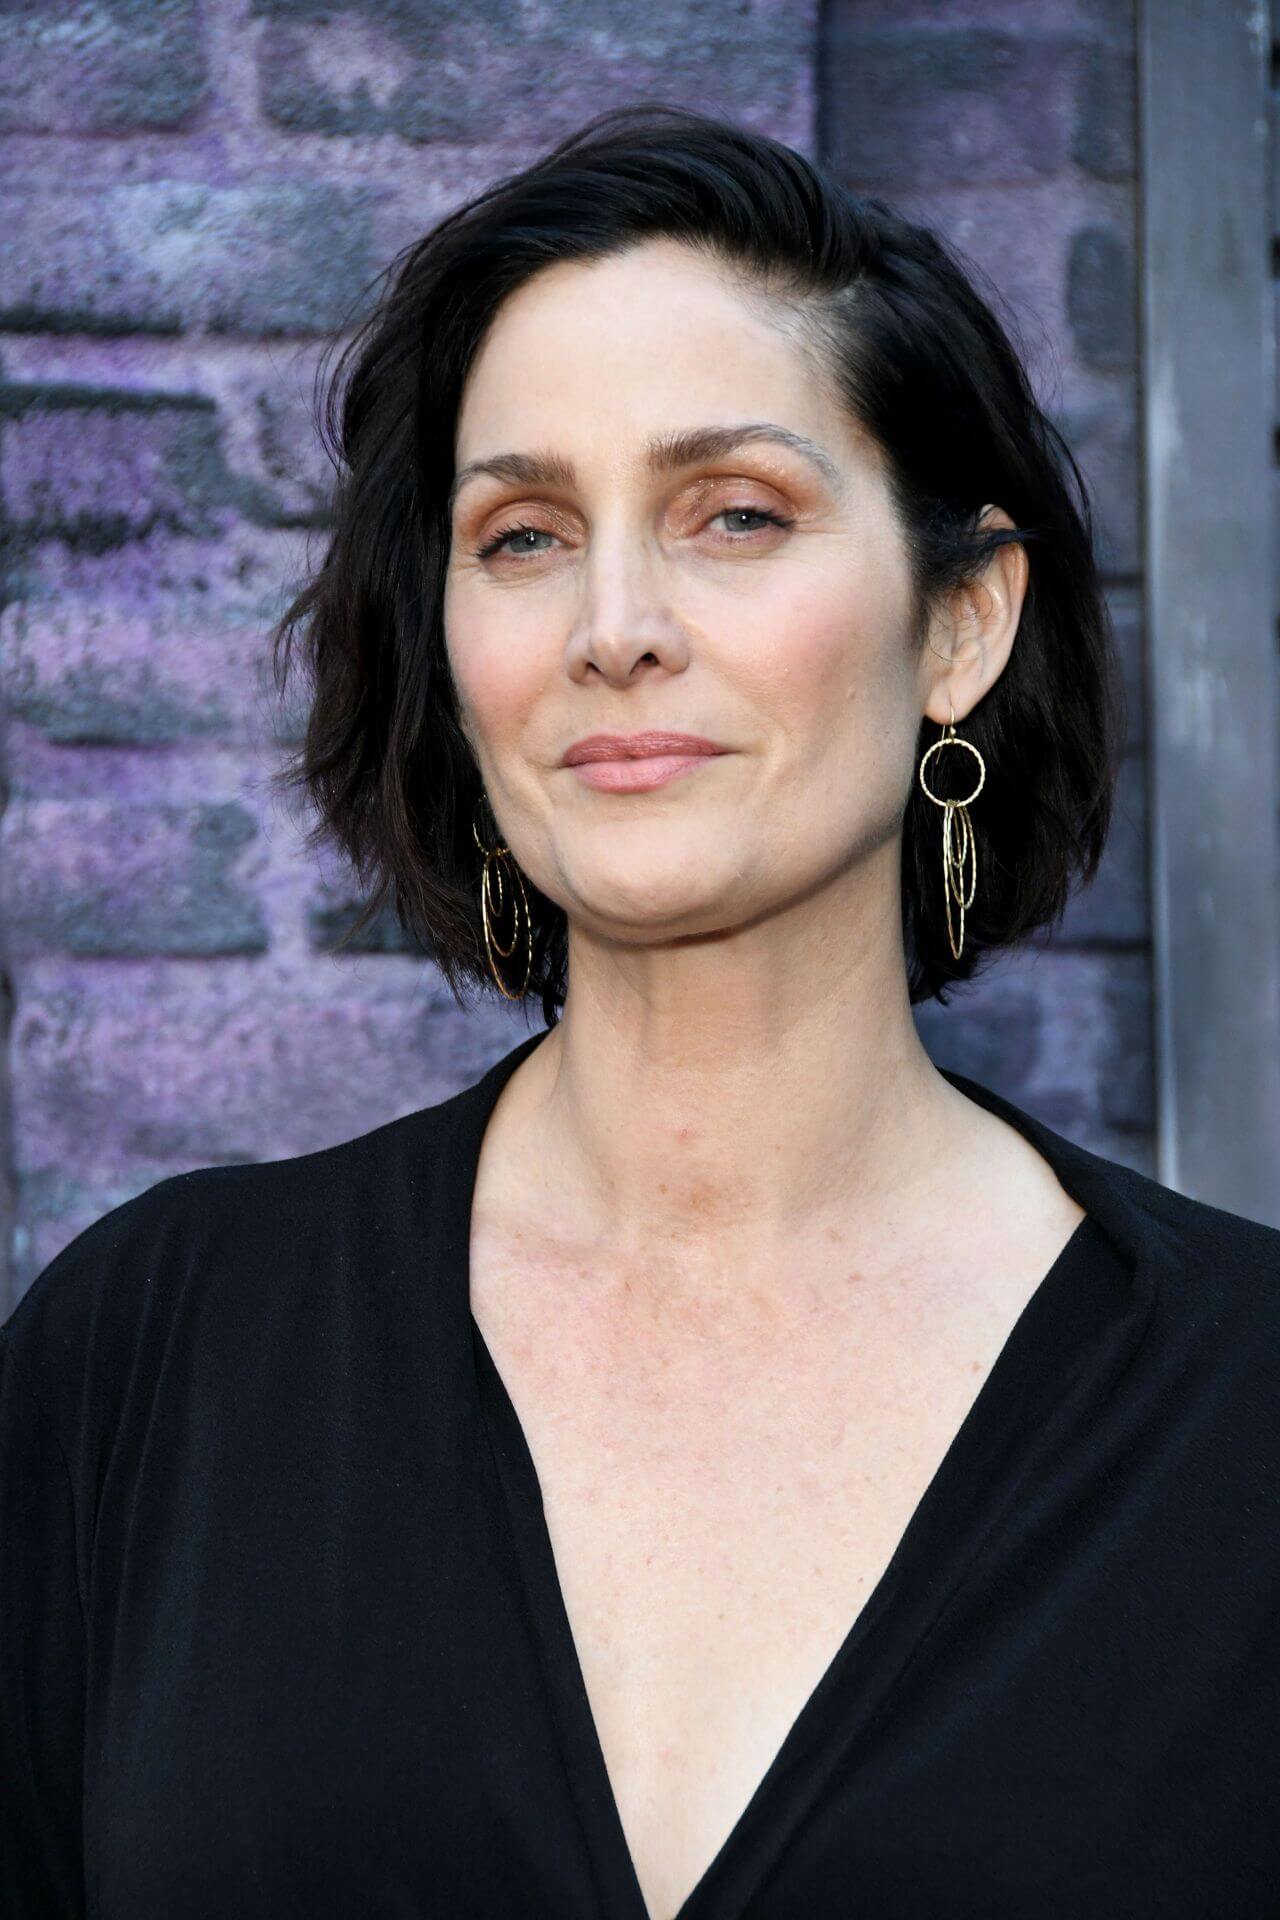 70+ Hot Pictures Of Carrie Anne Moss Will Drive You Nuts For Her 530